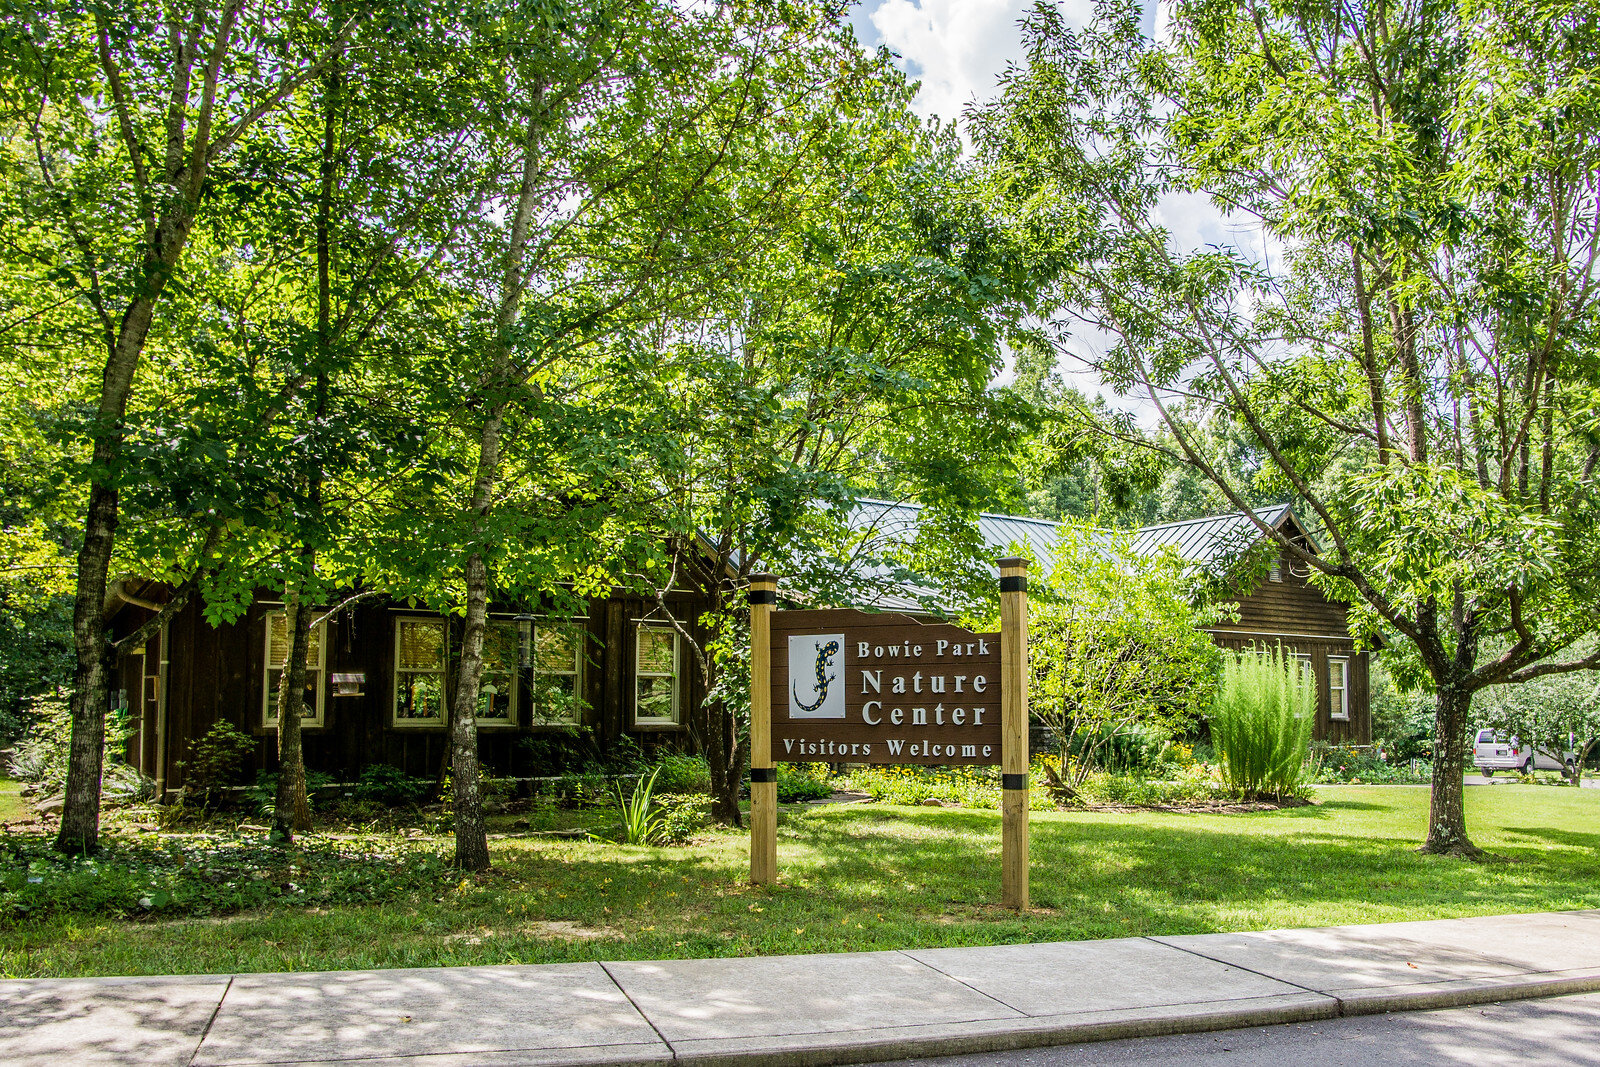 bowie-park-nature-center-visitors-welcome.jpg